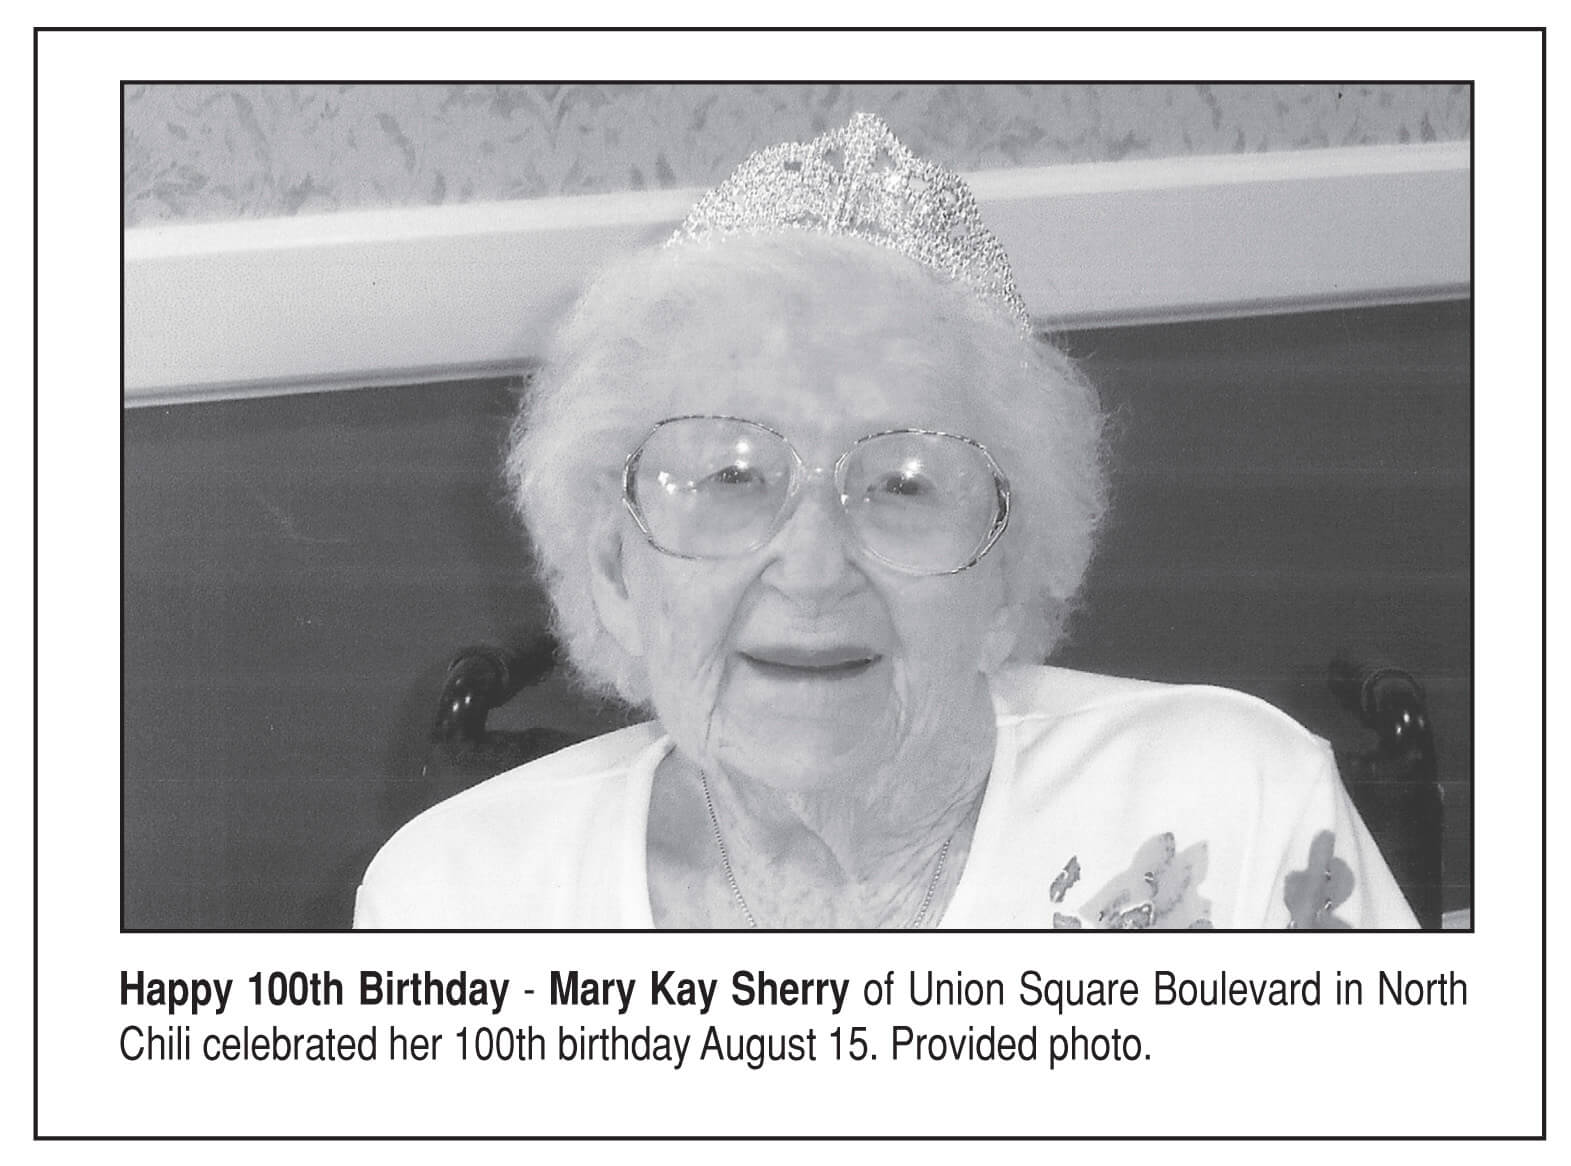 Westwood Common's Resident Mary Sherry celebrates her 100th birthday story in the Westside News August 2014